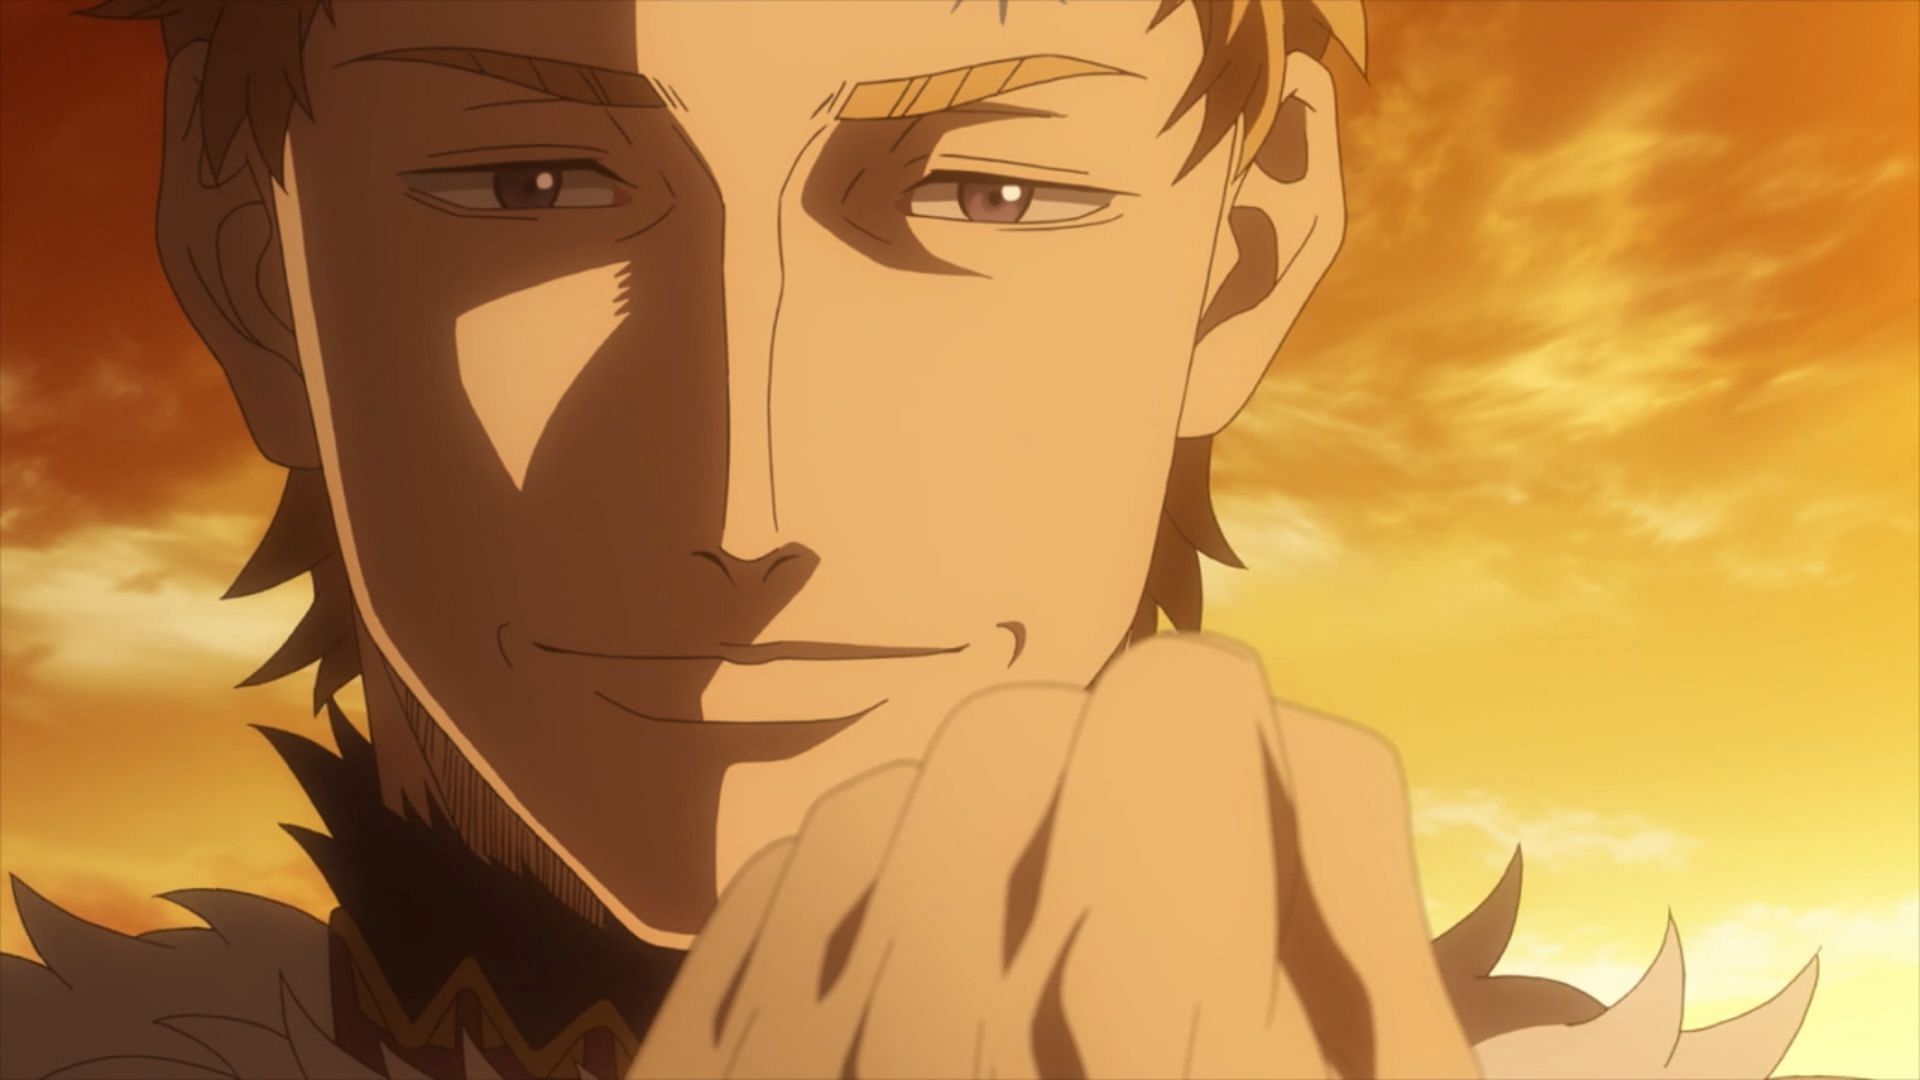 Black Clover: 5 plot twists from Tabata that shocked everyone